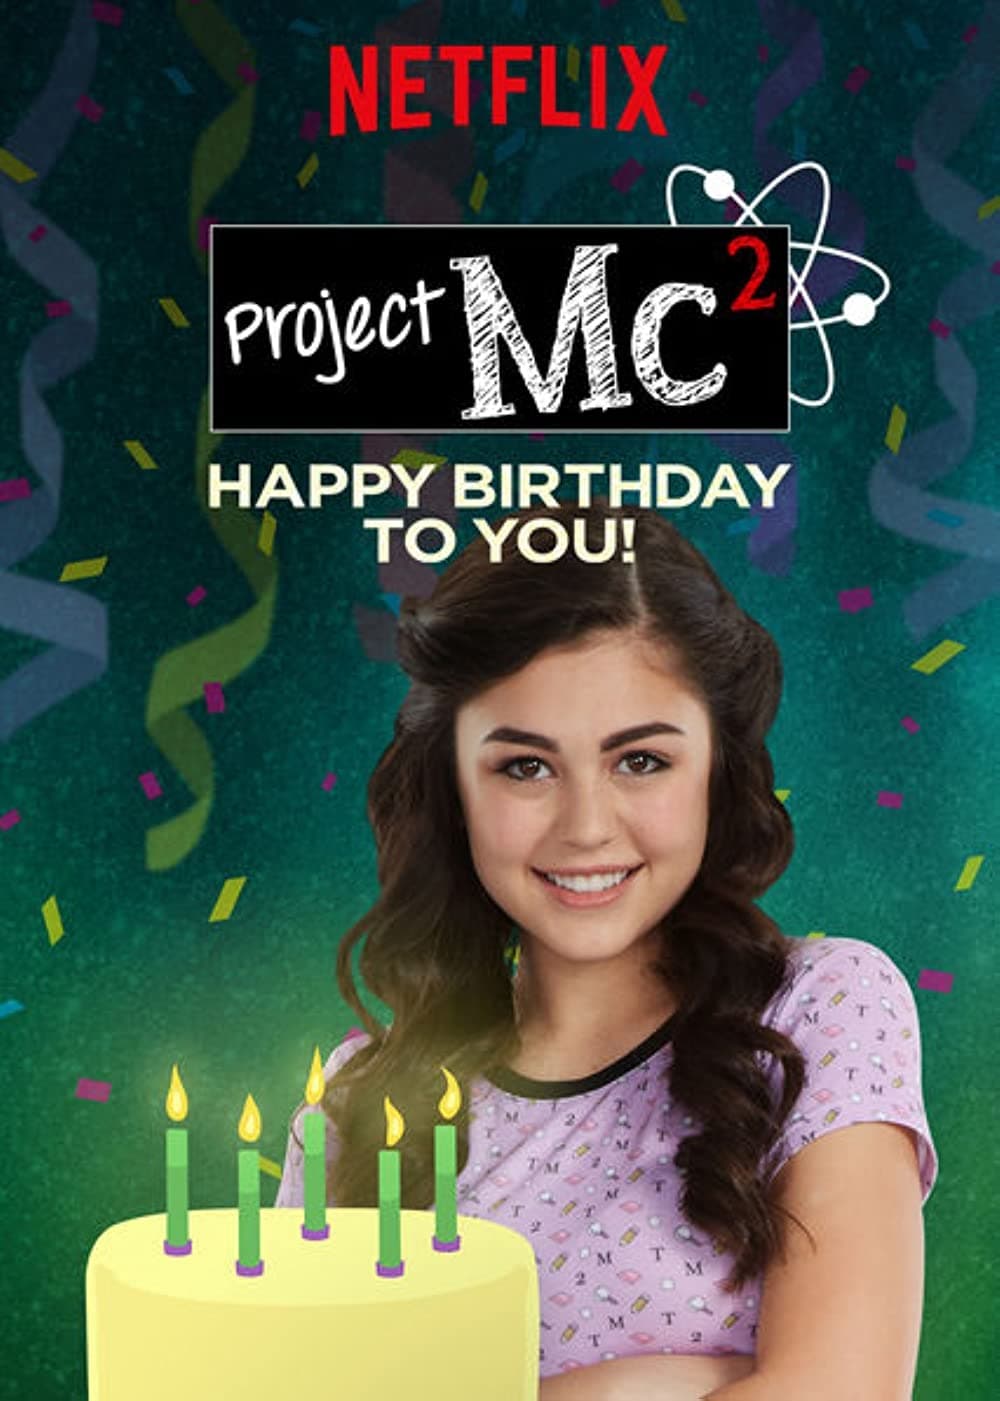 Project Mc²: Happy Birthday to You!